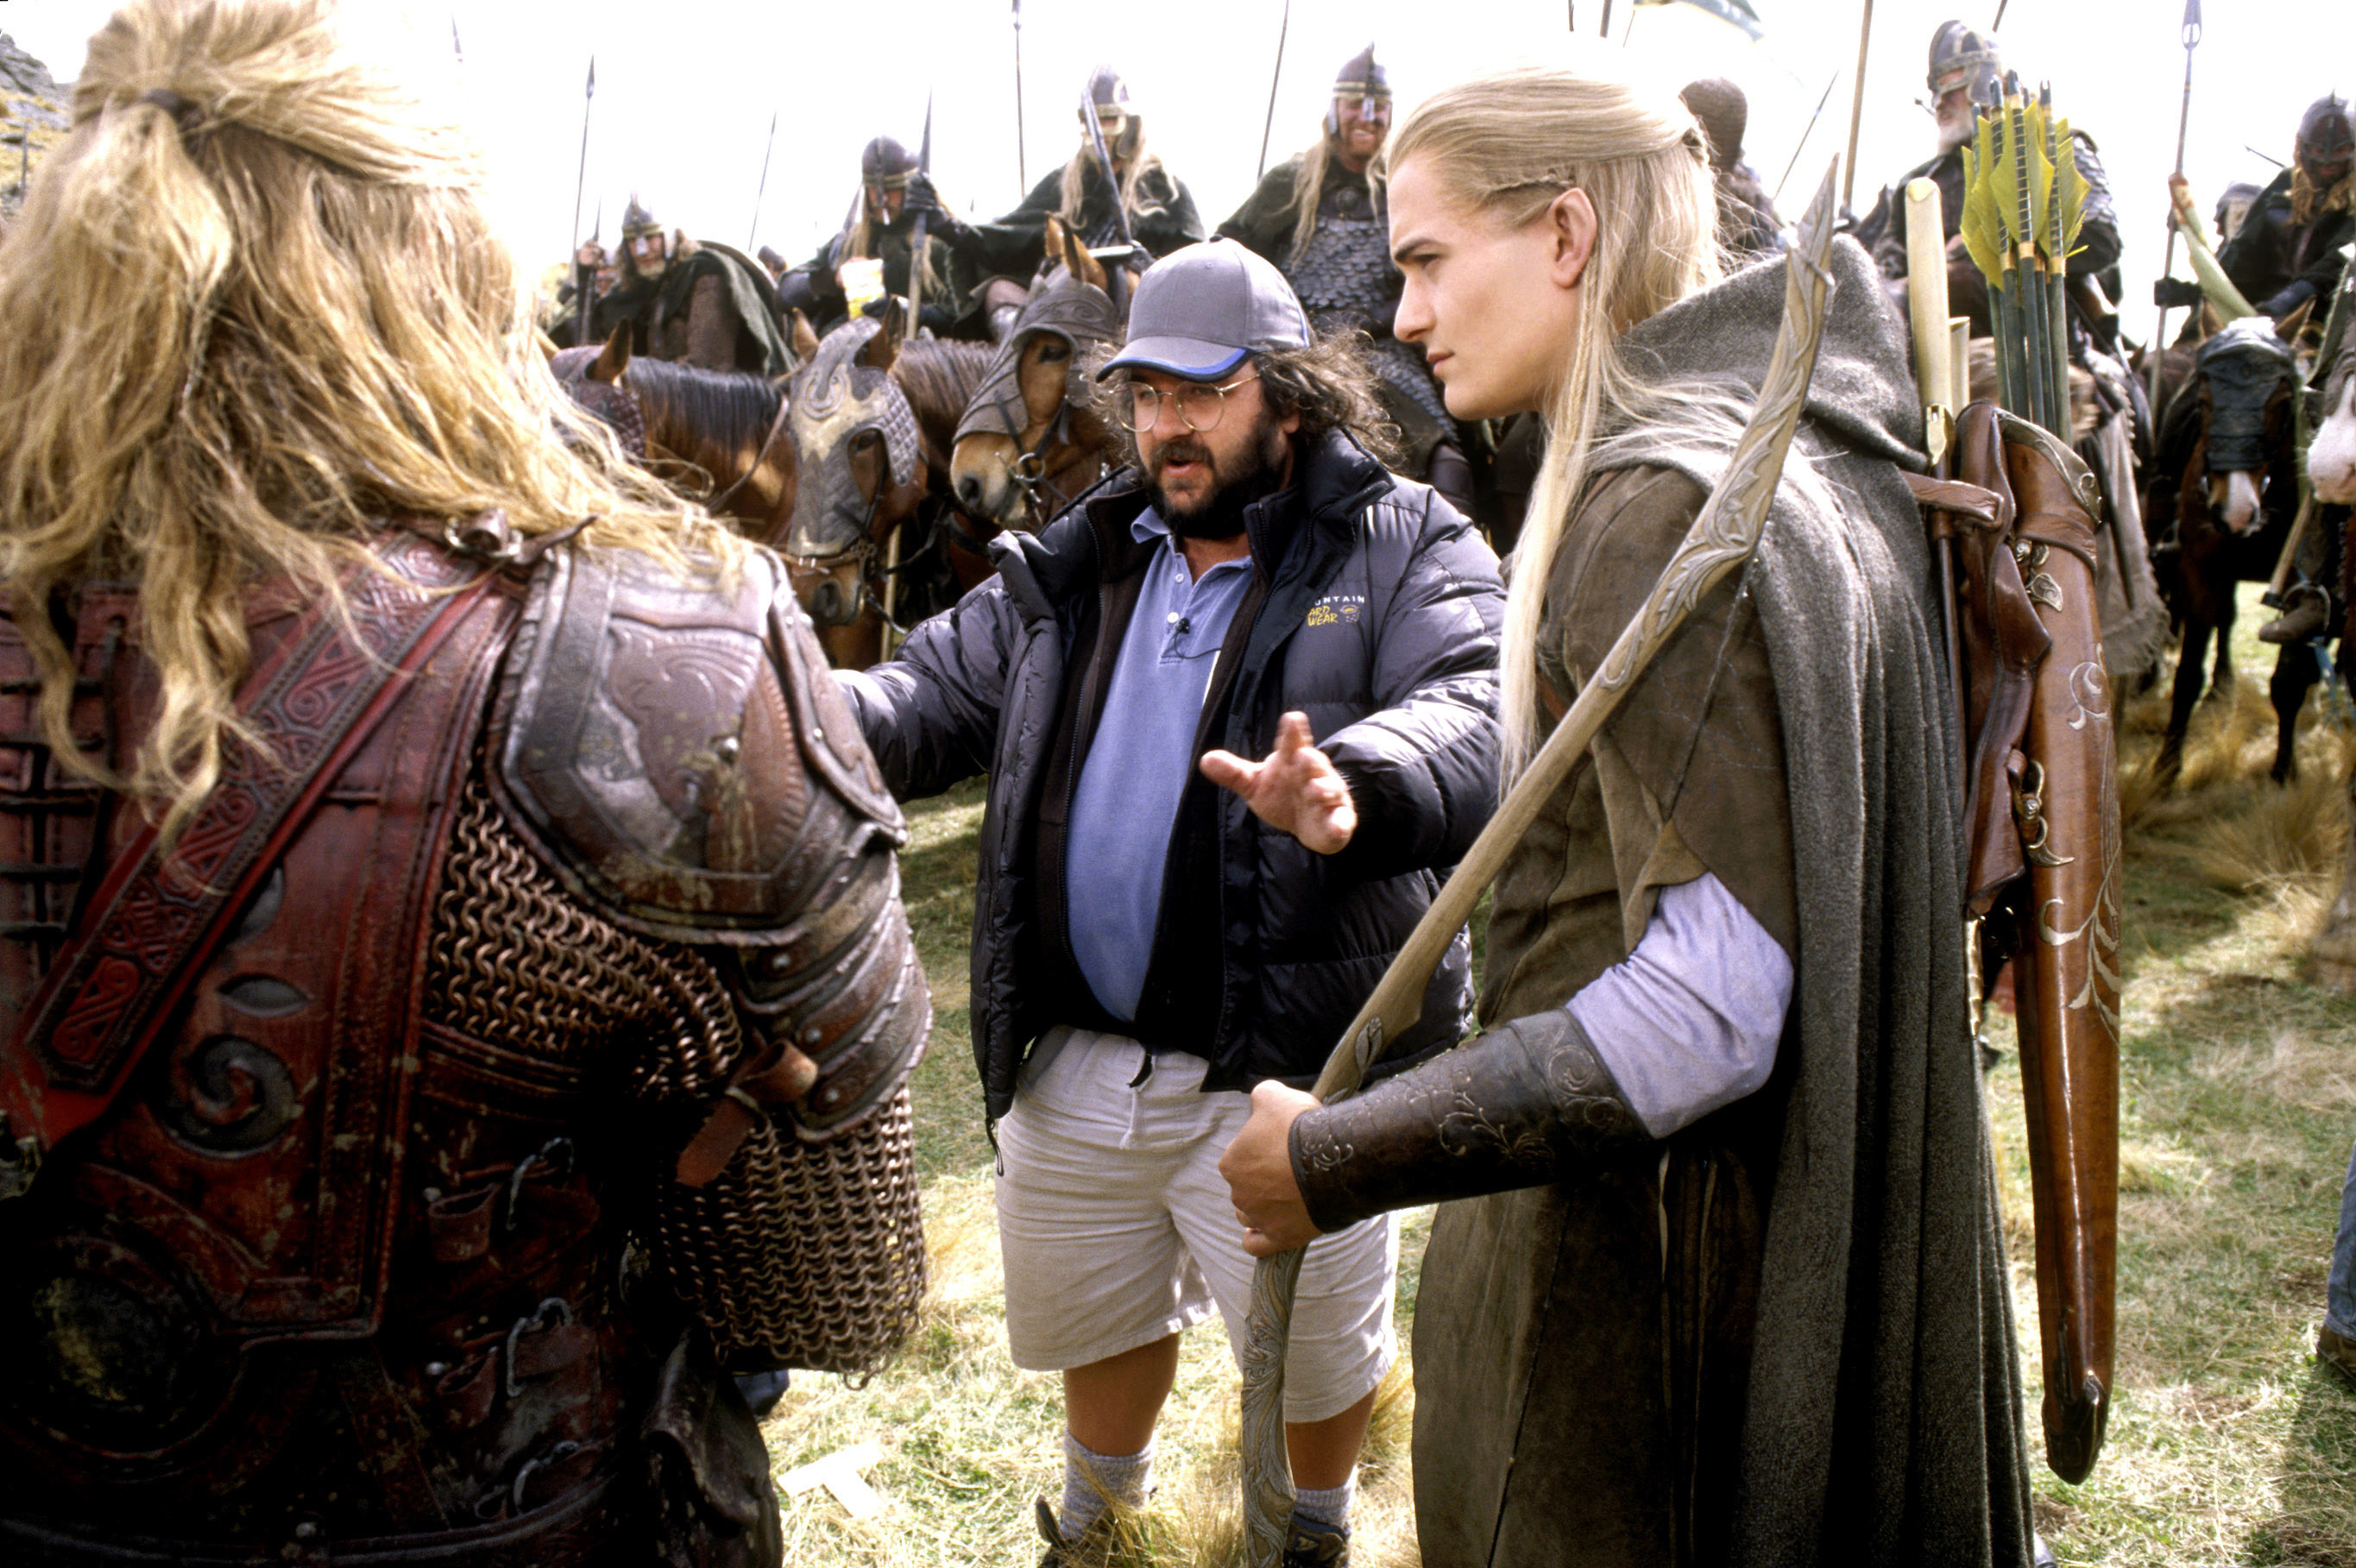 Orlando Bloom and Peter Jackson with others on set